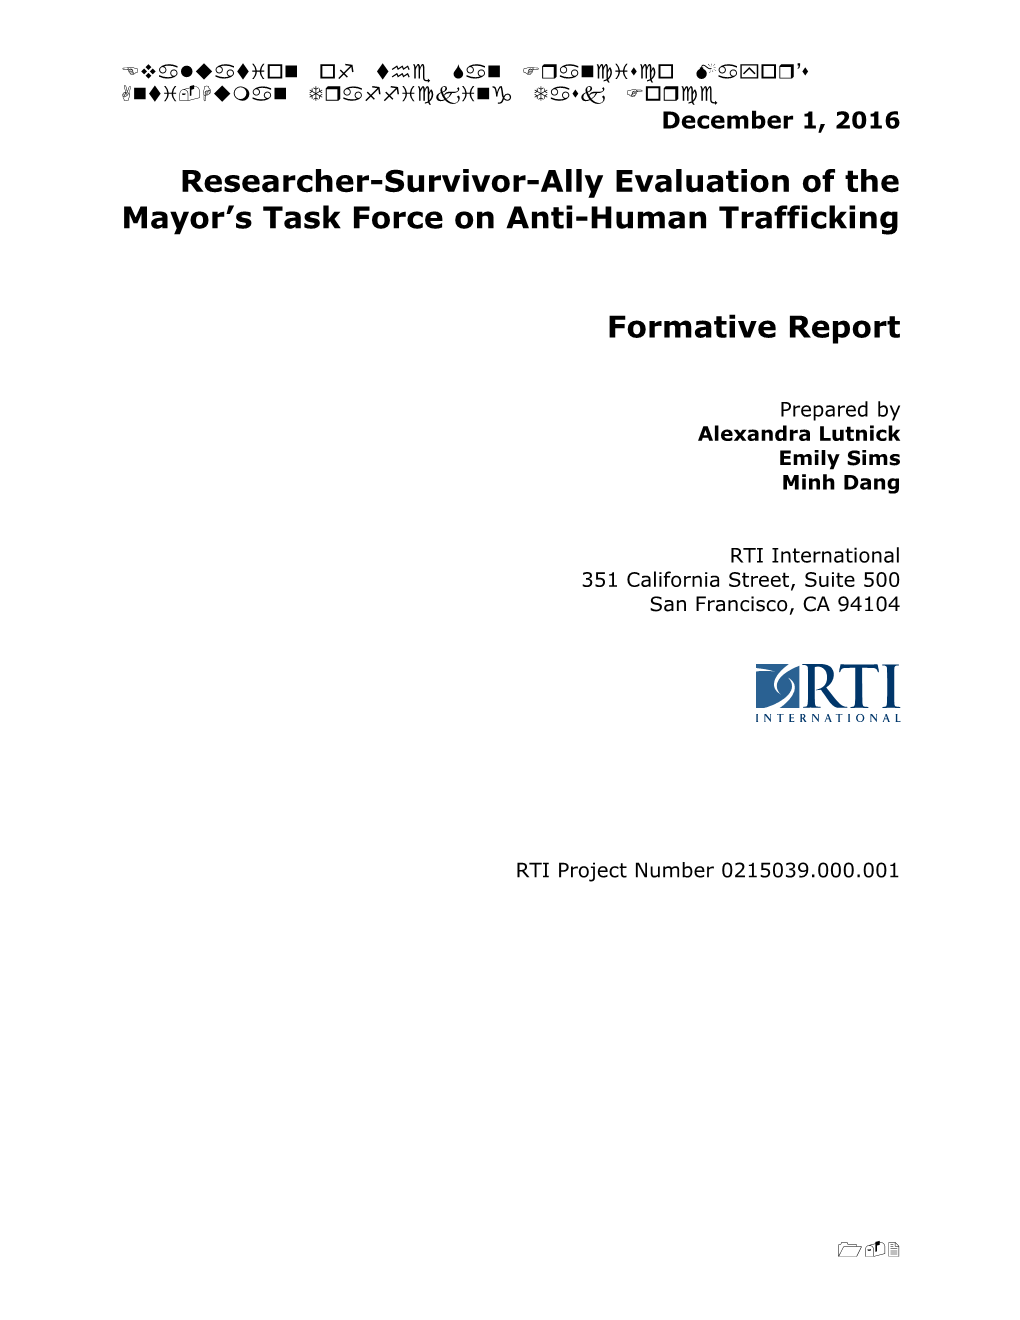 Researcher-Survivor-Ally Evaluation of the Mayor S Task Force on Anti-Human Trafficking